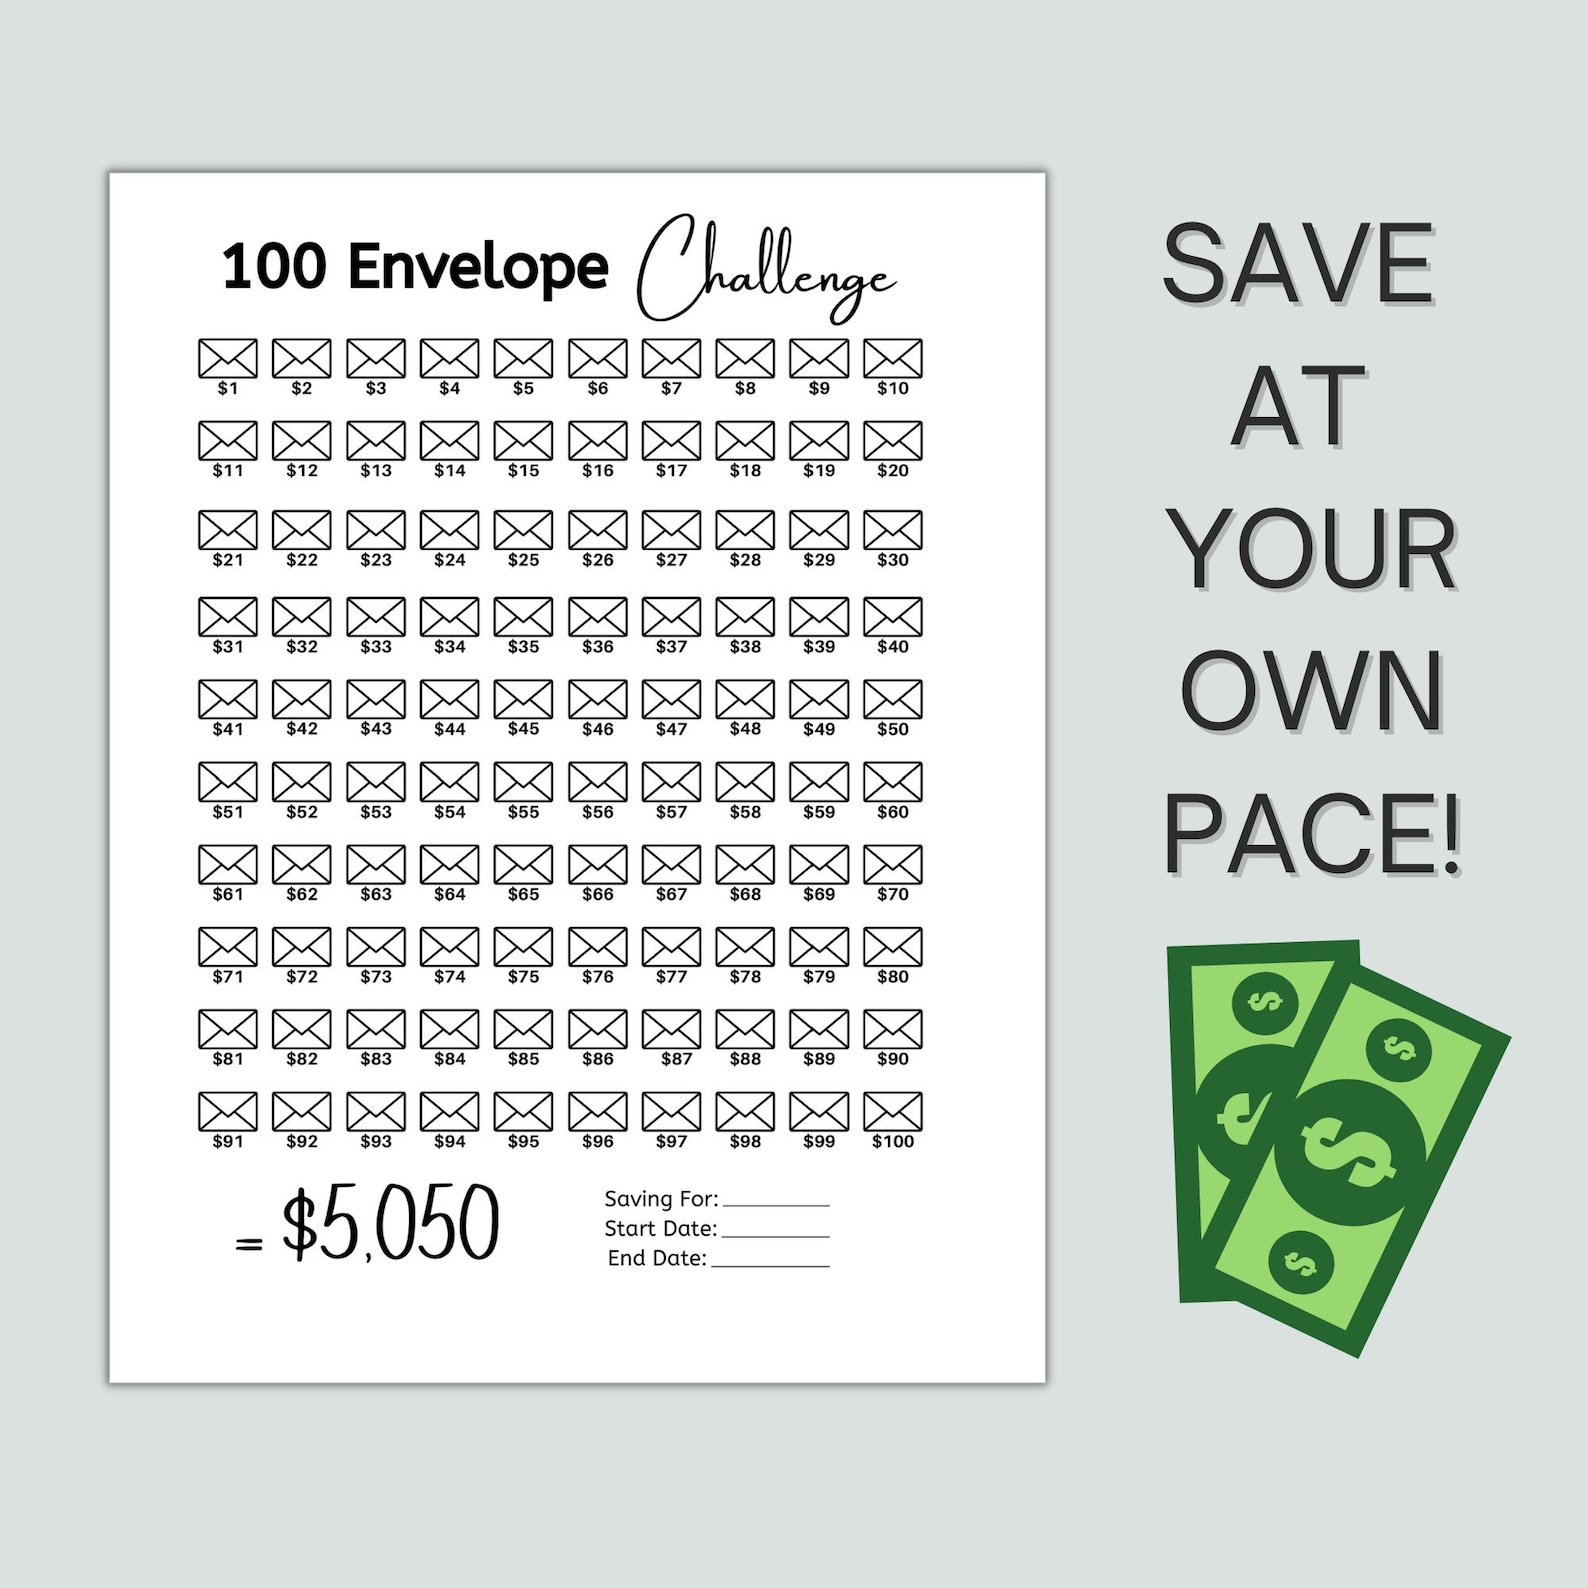 How Much Can You Save With The 100 Envelope Challenge